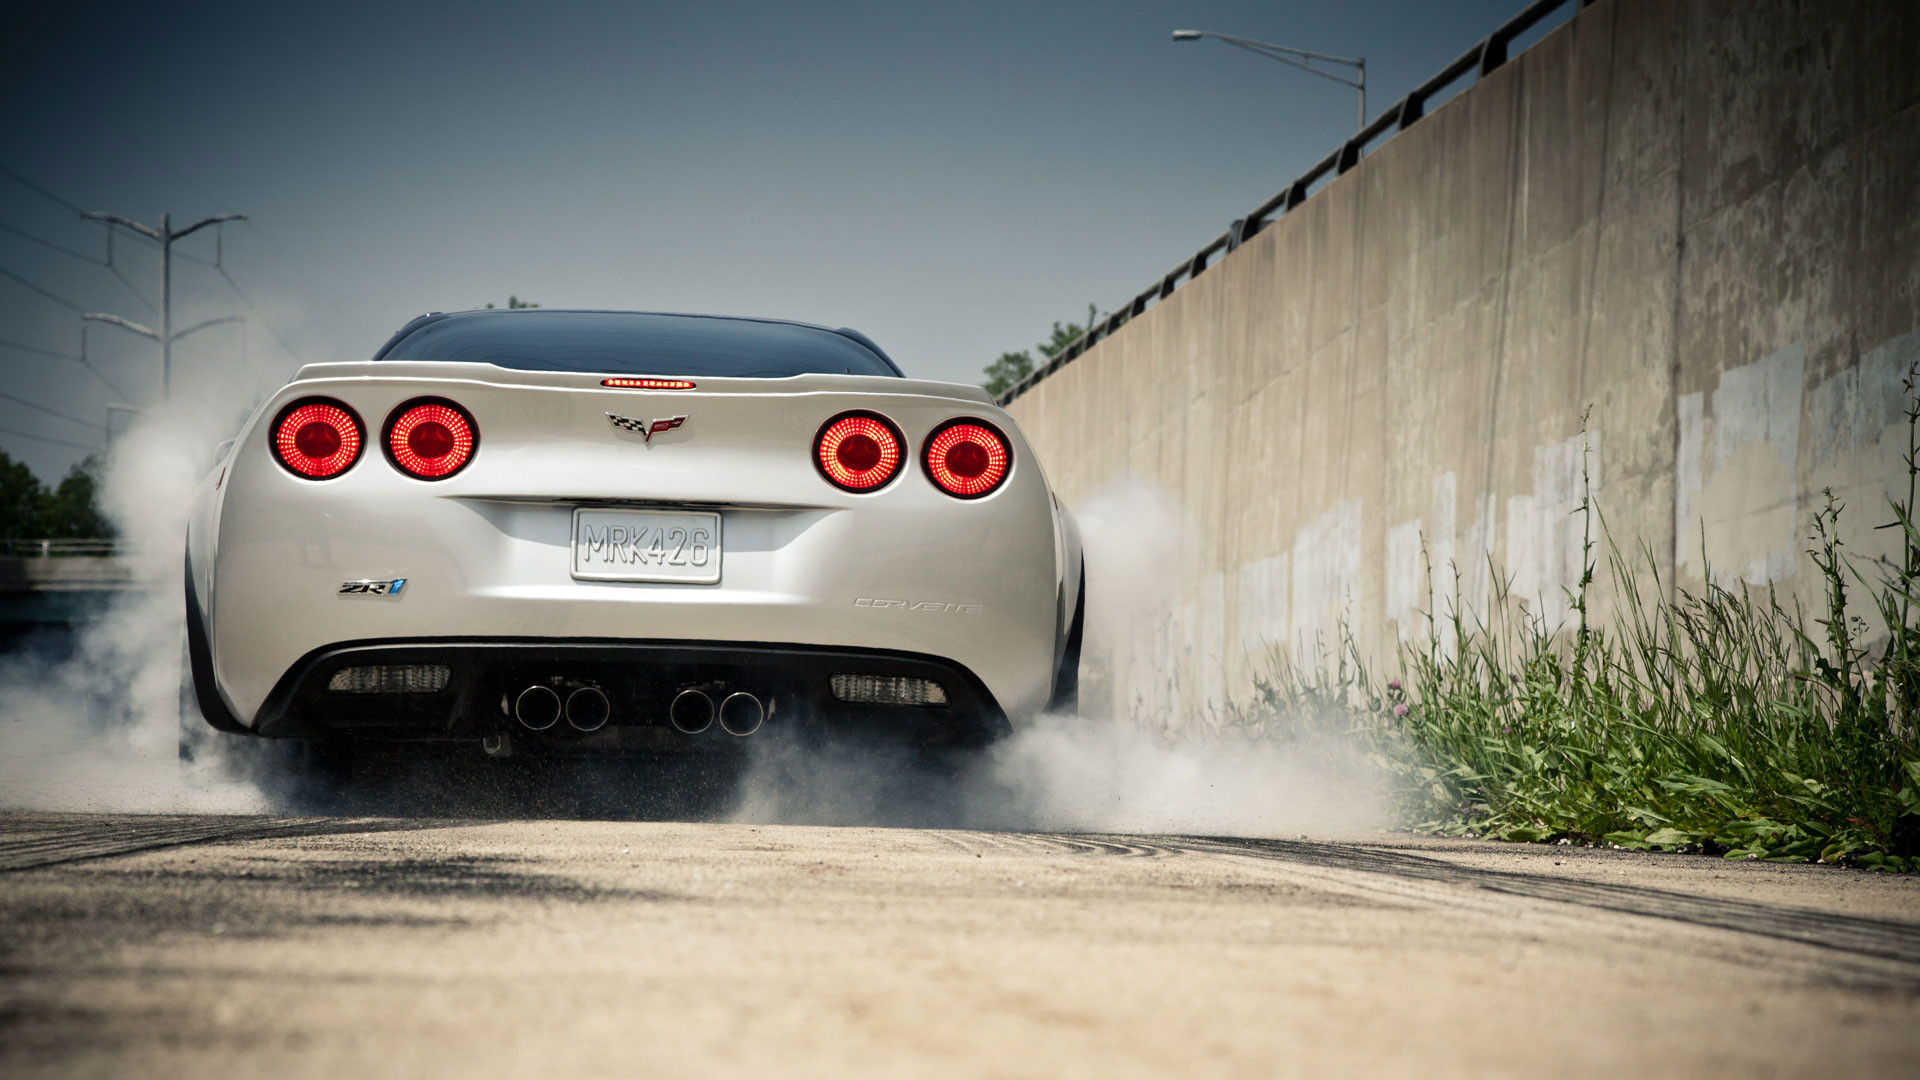 1920x1080 ... Chevrolet-Corvette-ZR1 wallpapers and images - wallpapers .